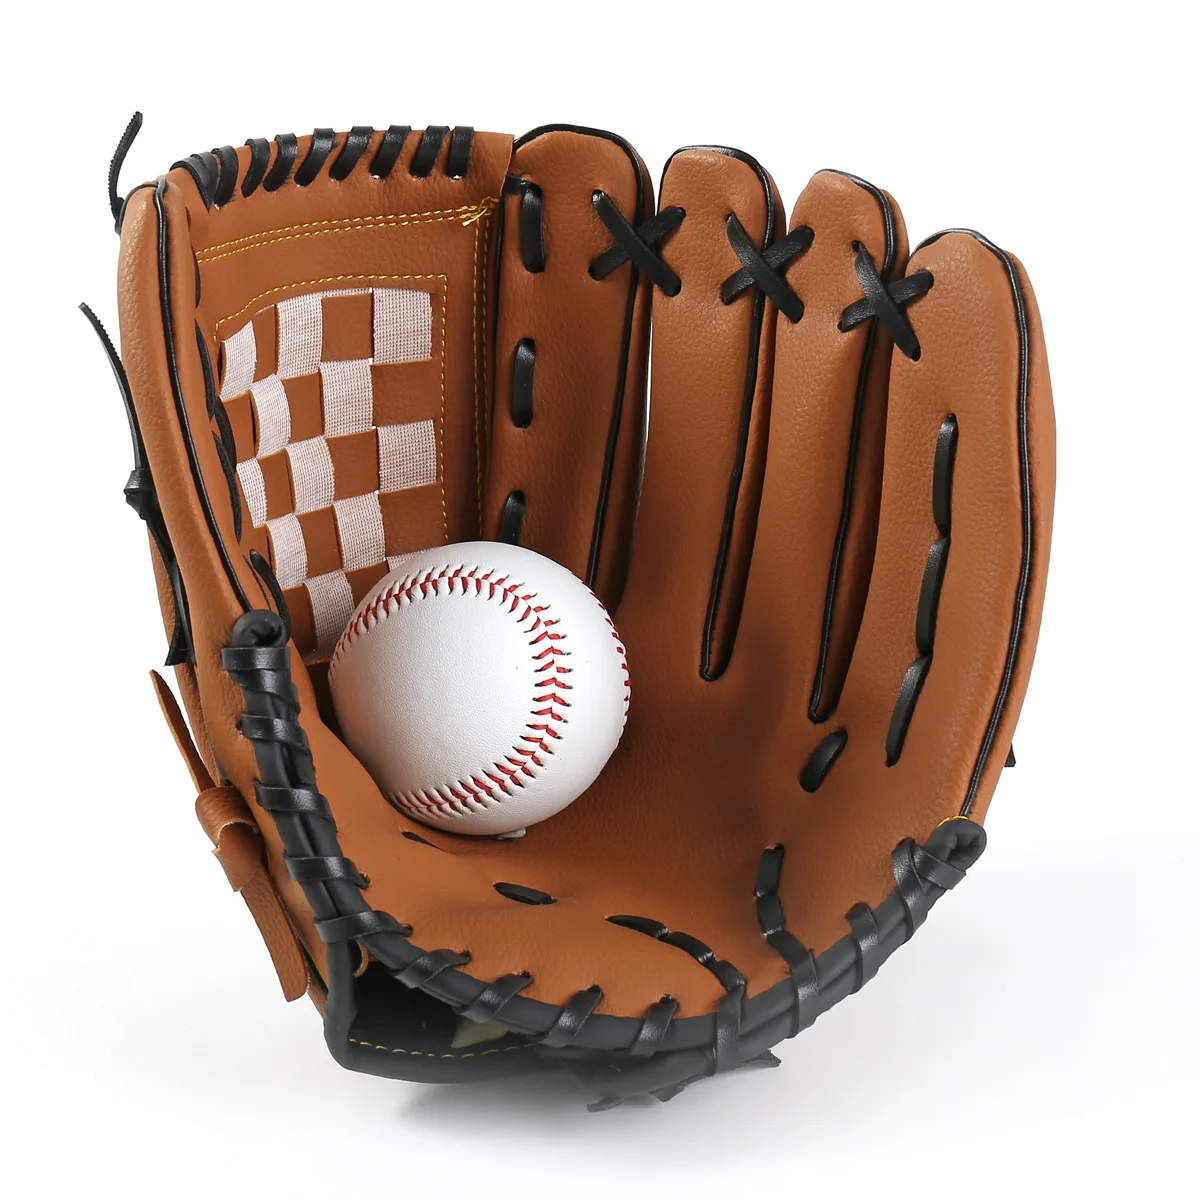 Medicinaal pols Vereniging Various Leather And Colors With Competitive Price Baseball Glove Softball  Batting Gloves - Buy Baseball Glove,Baseball & Softball Gloves,Baseball  Batting Gloves Product on Alibaba.com